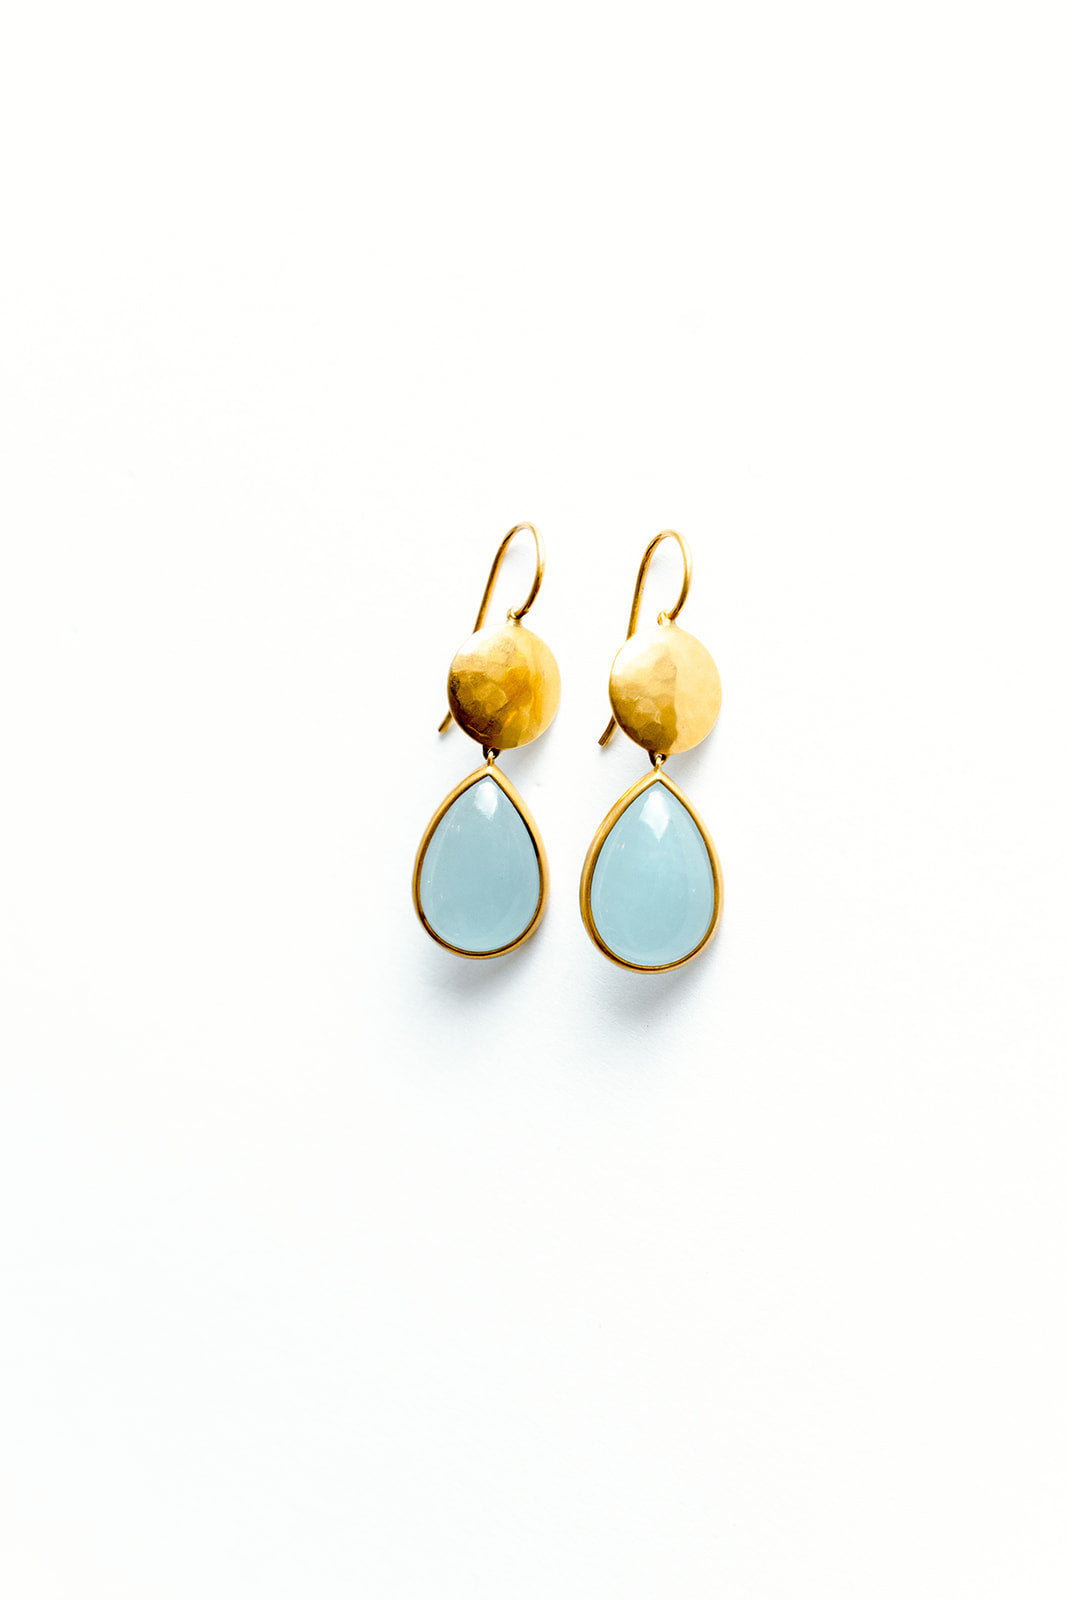 22K Yellow Gold Sundisc Earrings with Pear Shaped Aquamarines